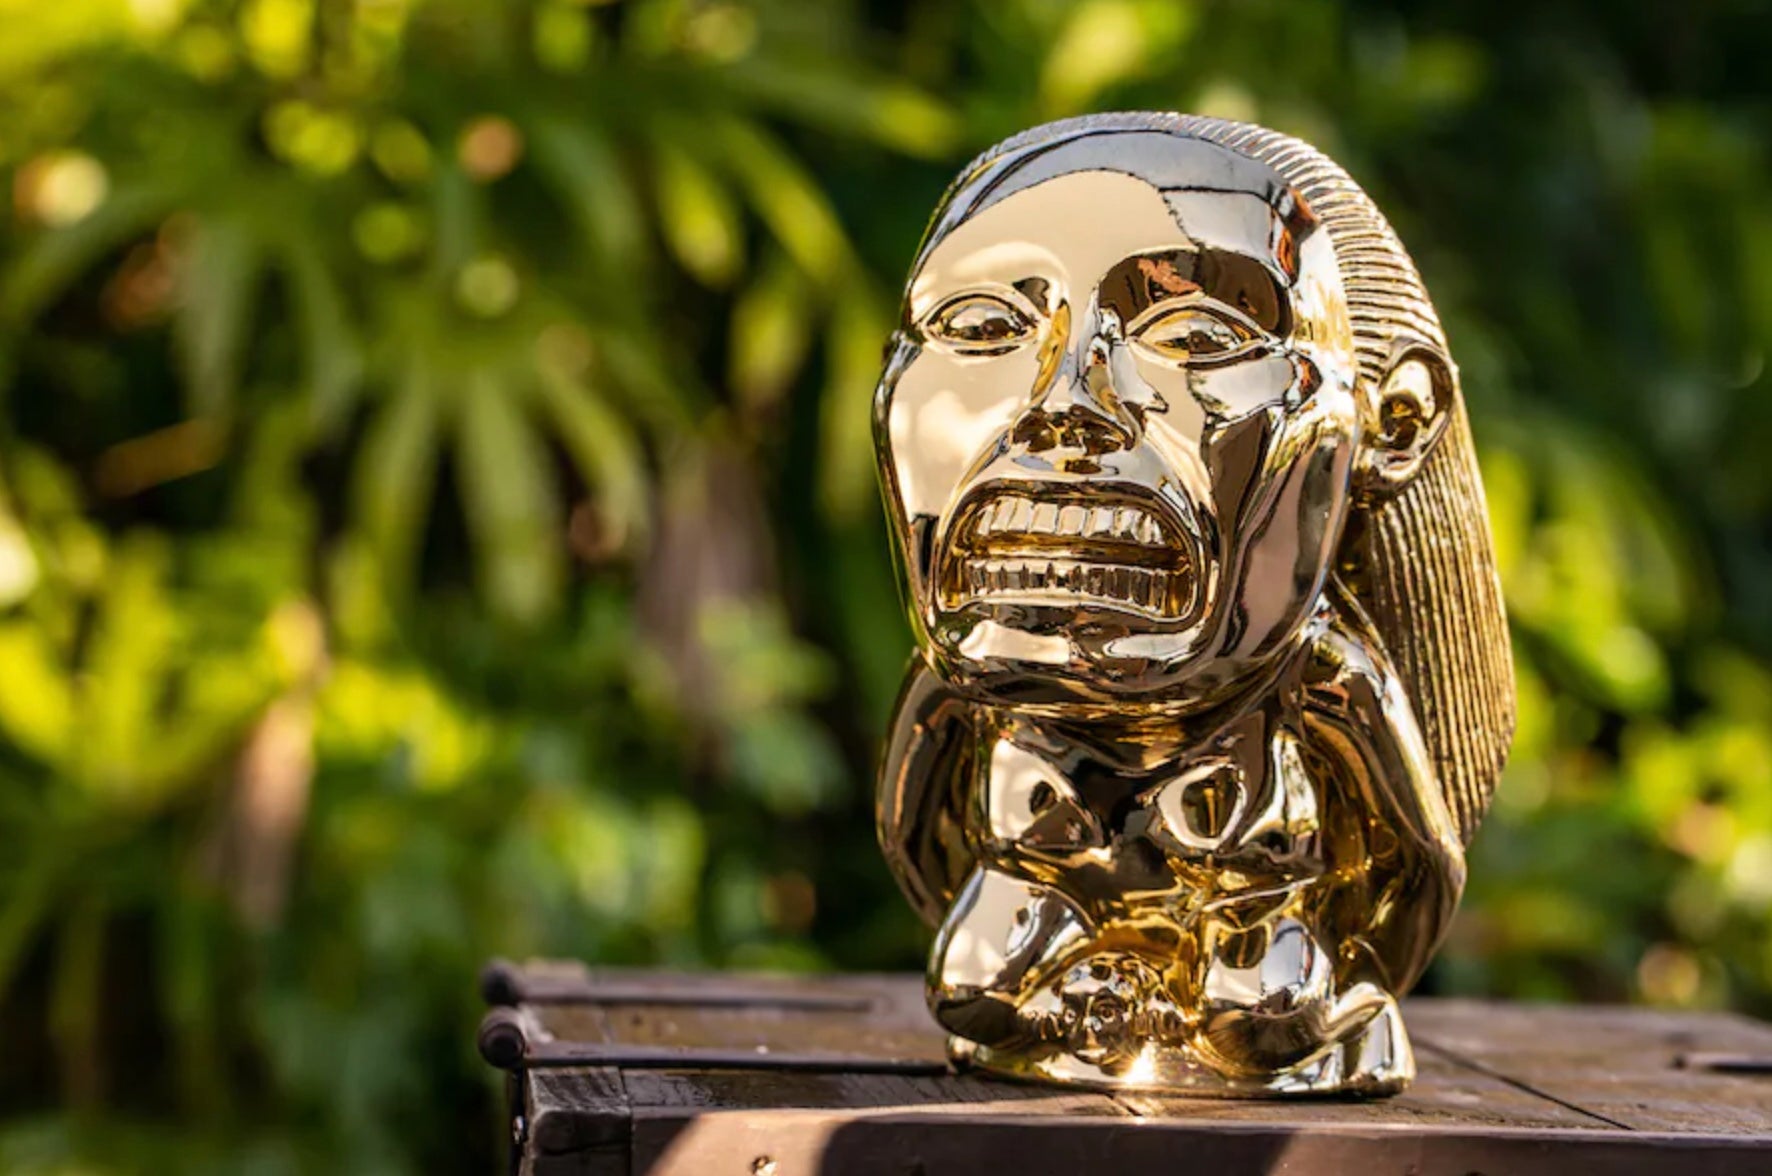 Fertility idol from Raiders of the Lost Ark (Image: Disney Parks)